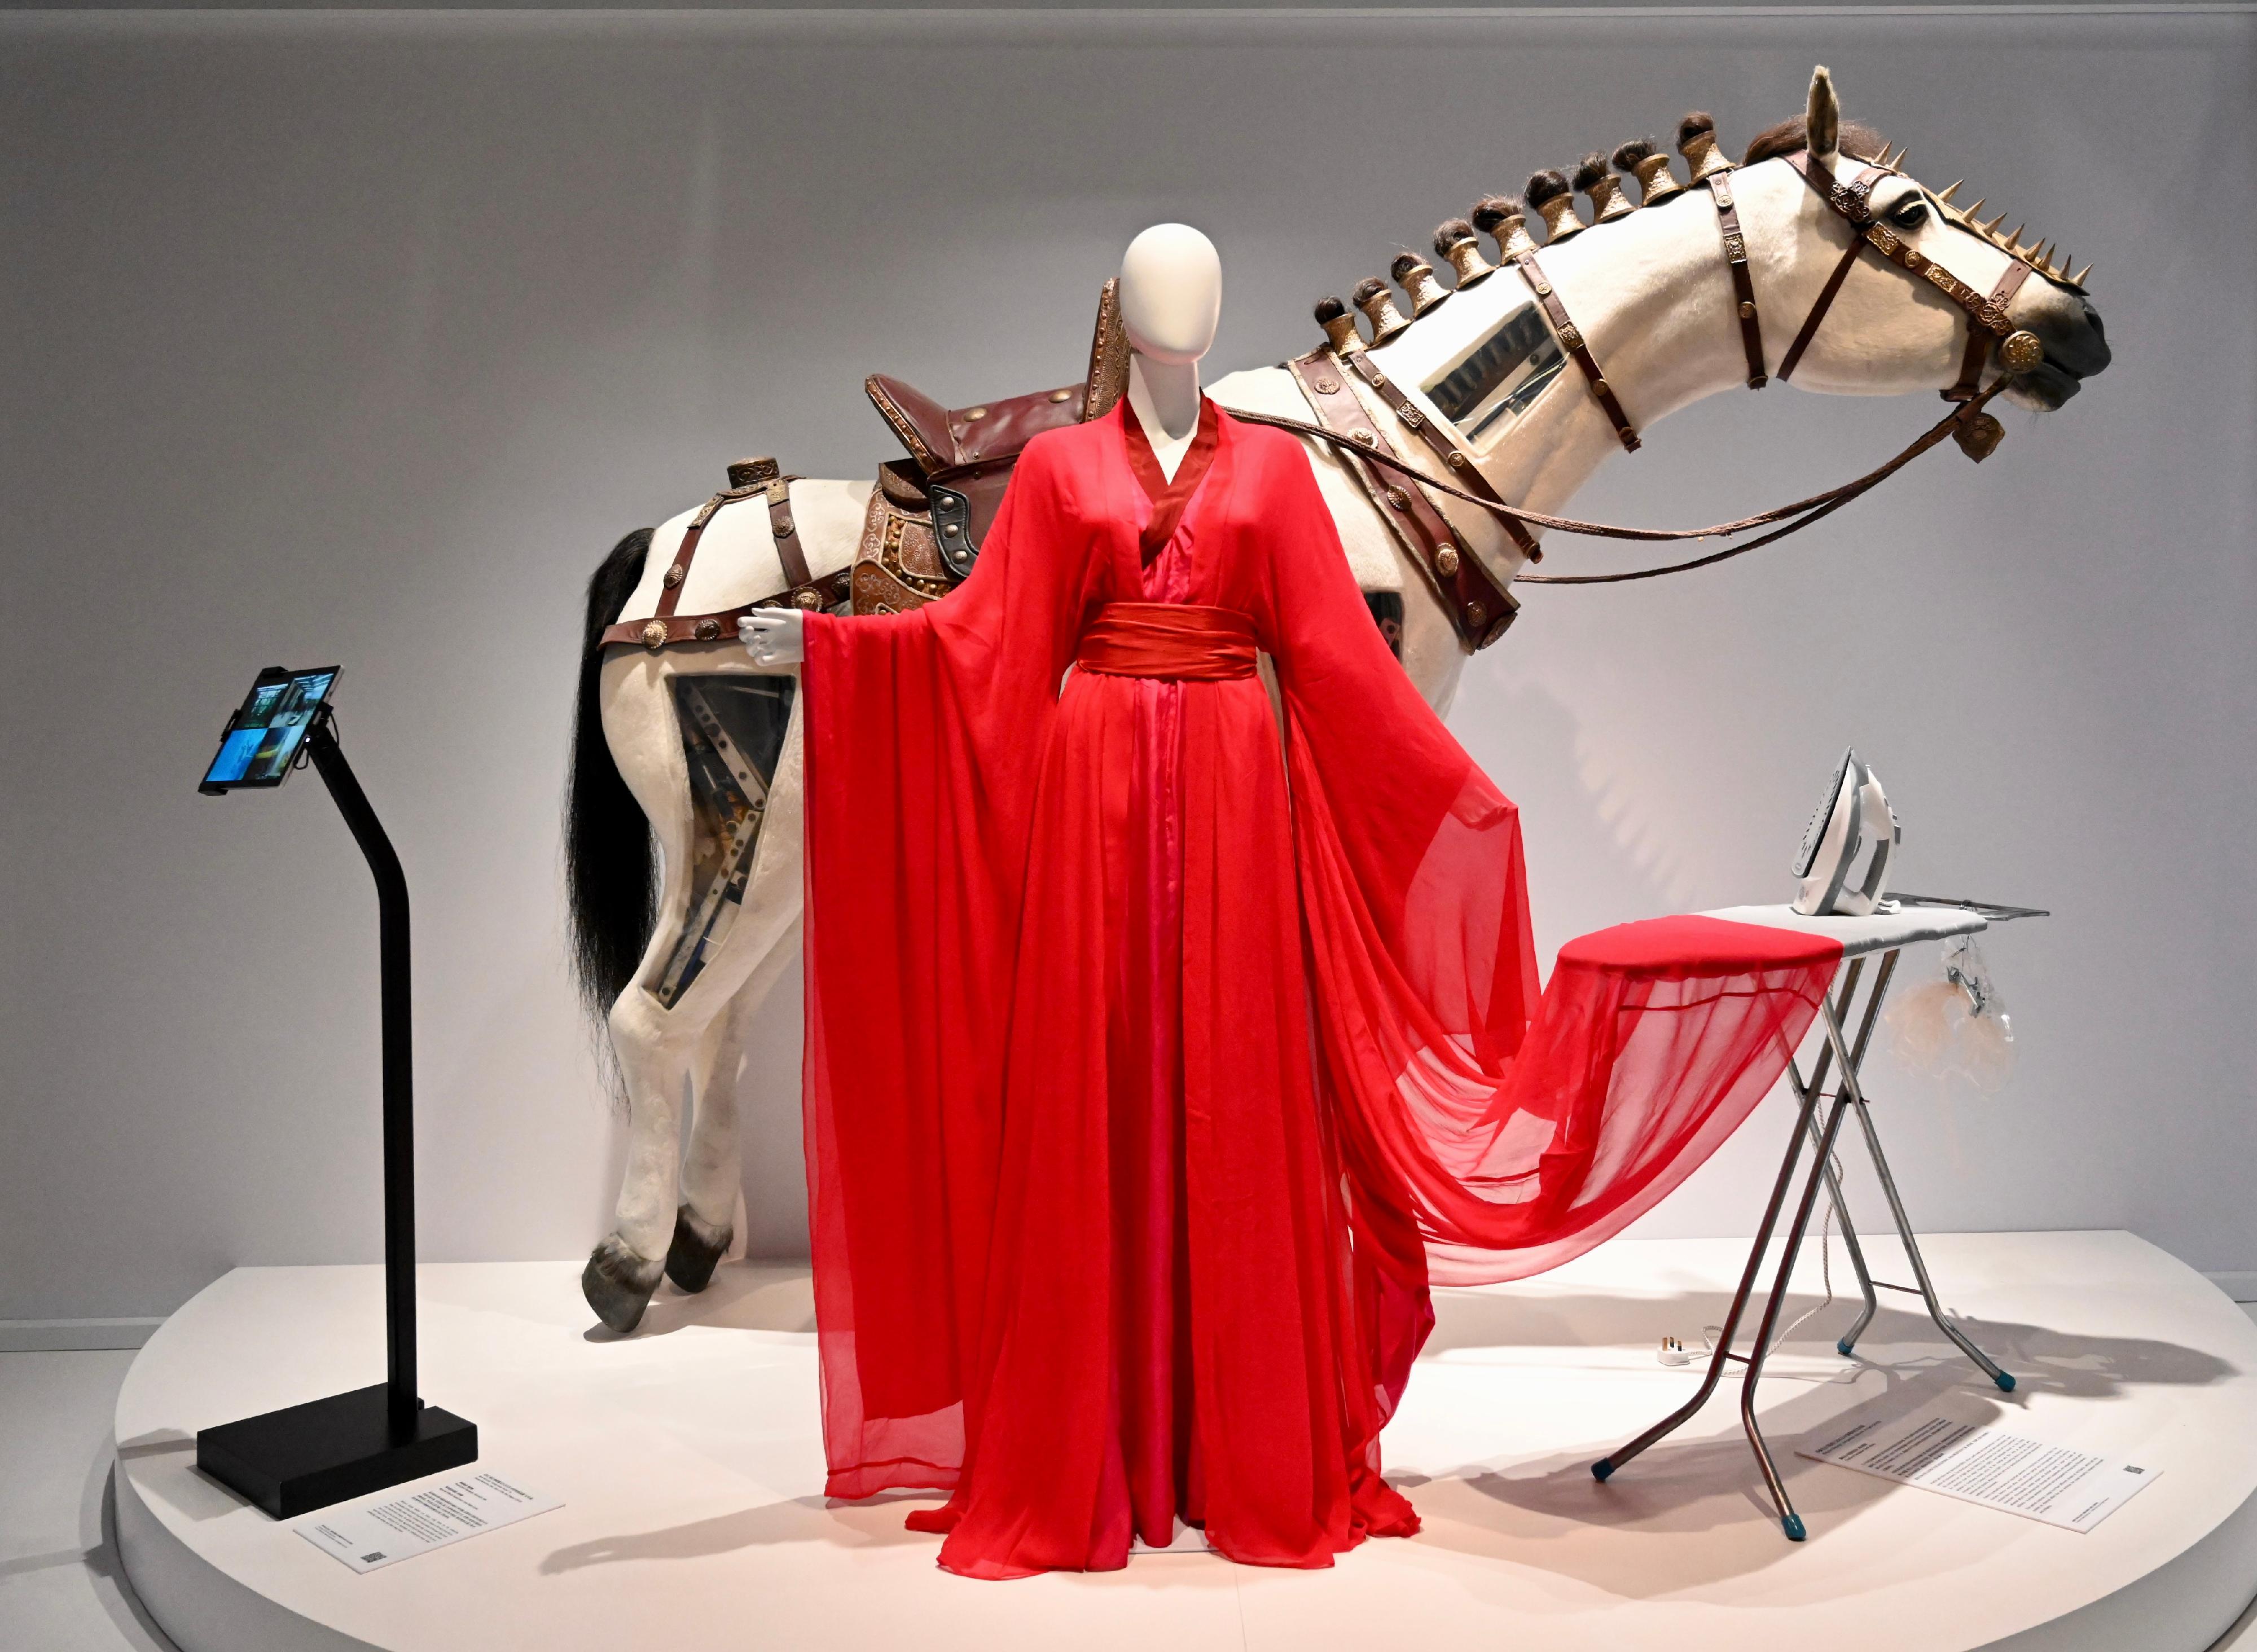 The opening ceremony for the "Out of Thin Air: Hong Kong Film Arts & Costumes Exhibition" was held today (May 2) at the Hong Kong Heritage Museum. Photo shows Maggie Cheung's red period costume from "Hero" (2002) and special prop underwater horse from "Young Detective Dee: Rise of the Sea Dragon" (2013).
